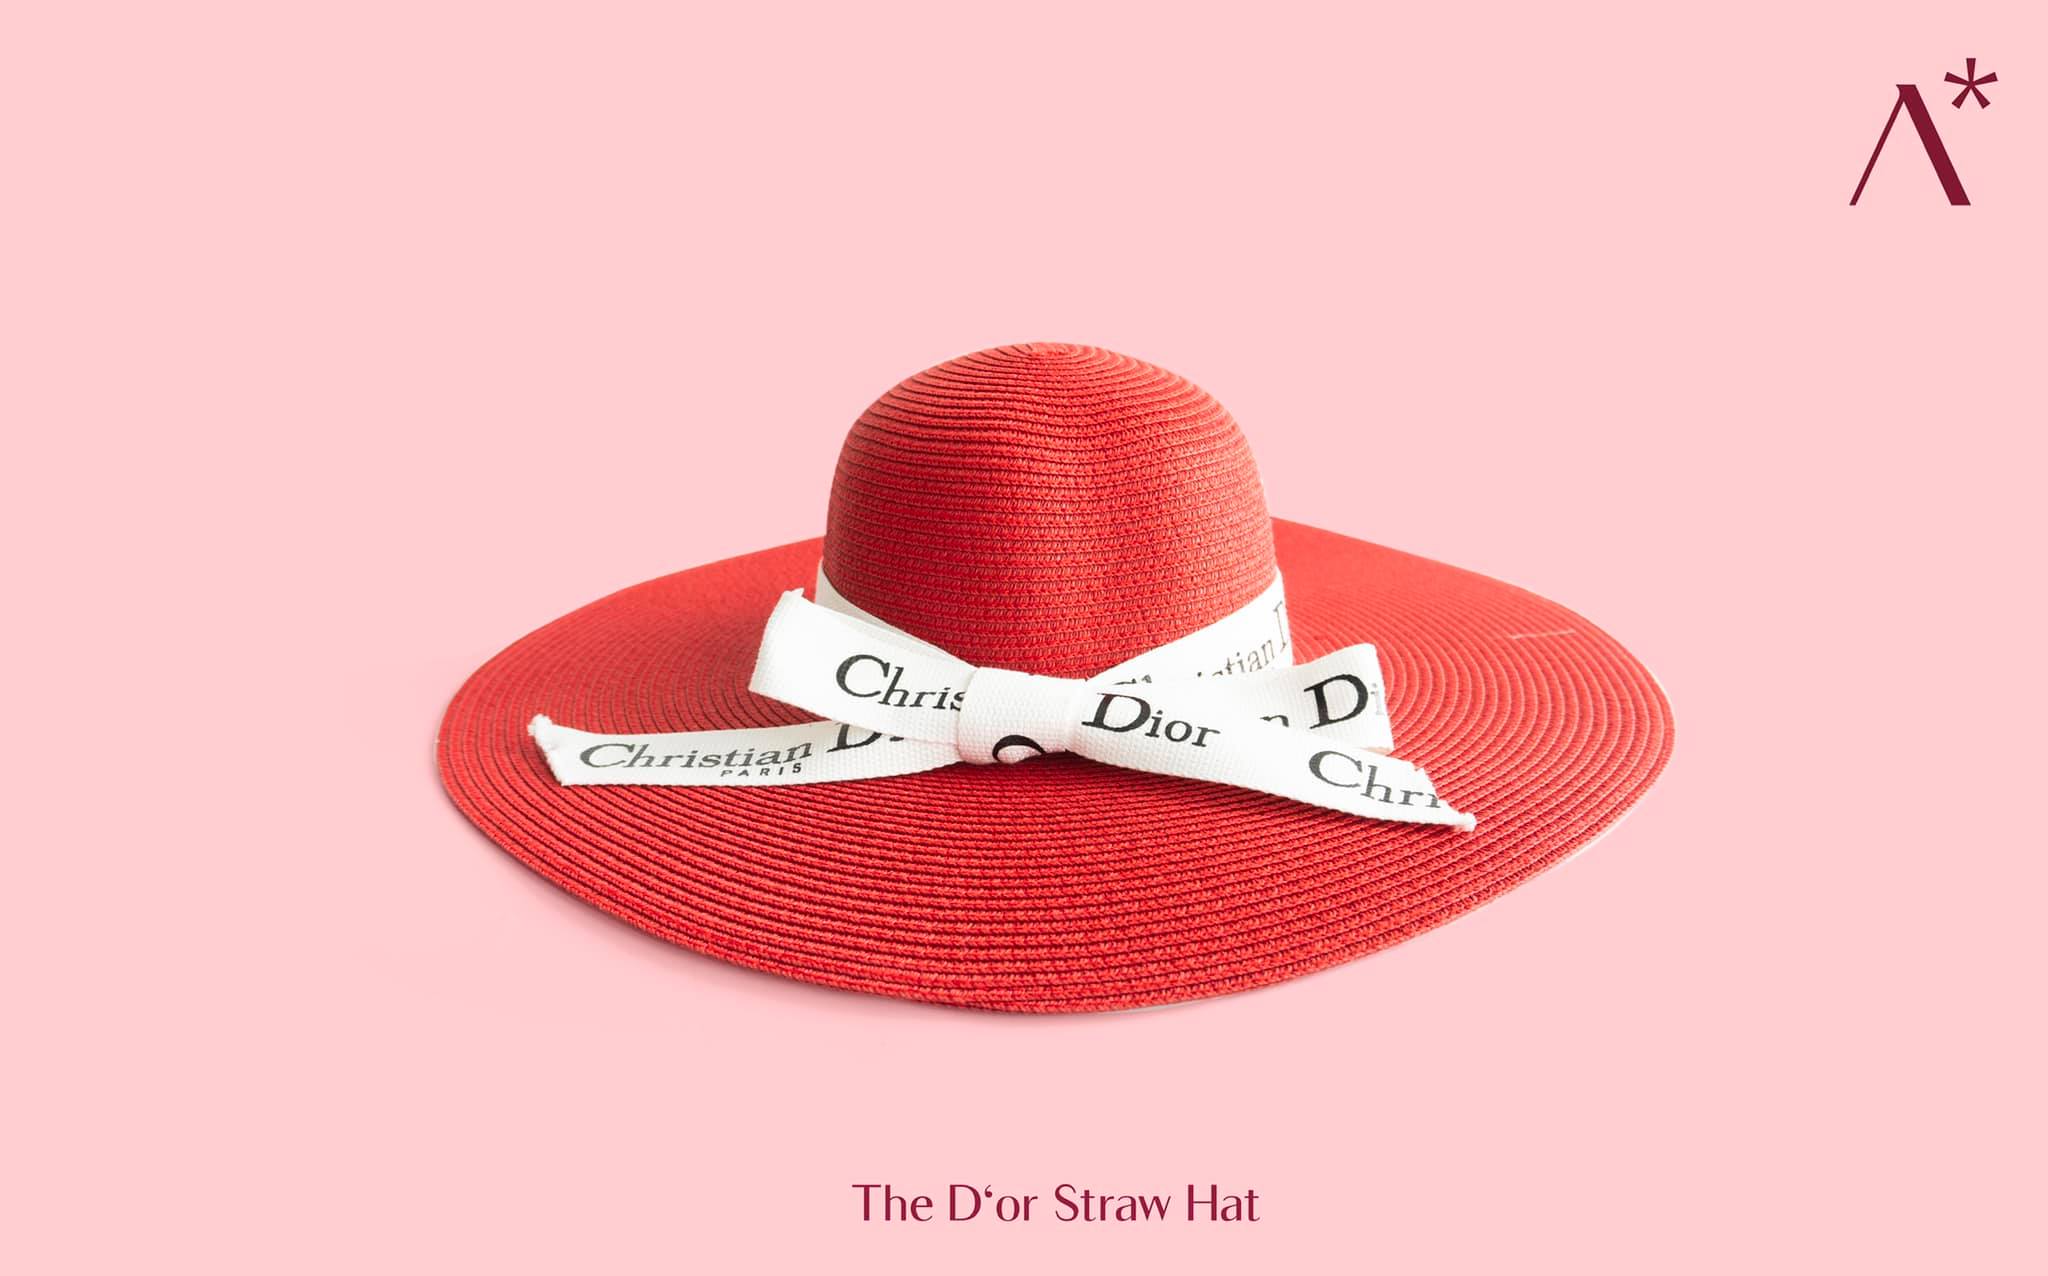 The D'or Straw Hat